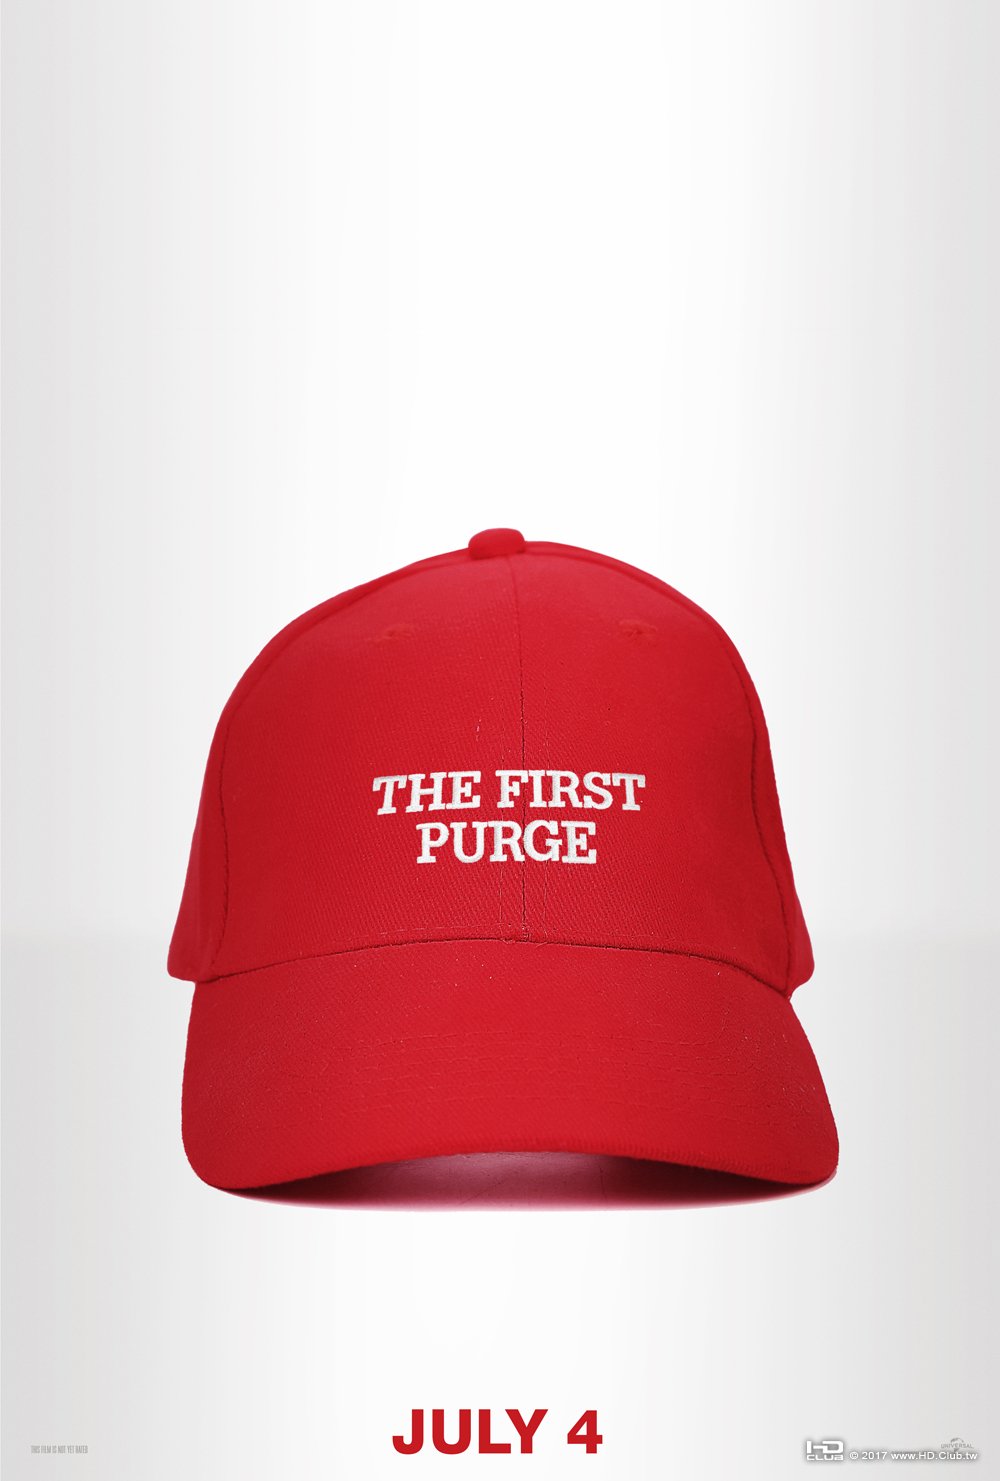 the-first-purge-poster.jpg